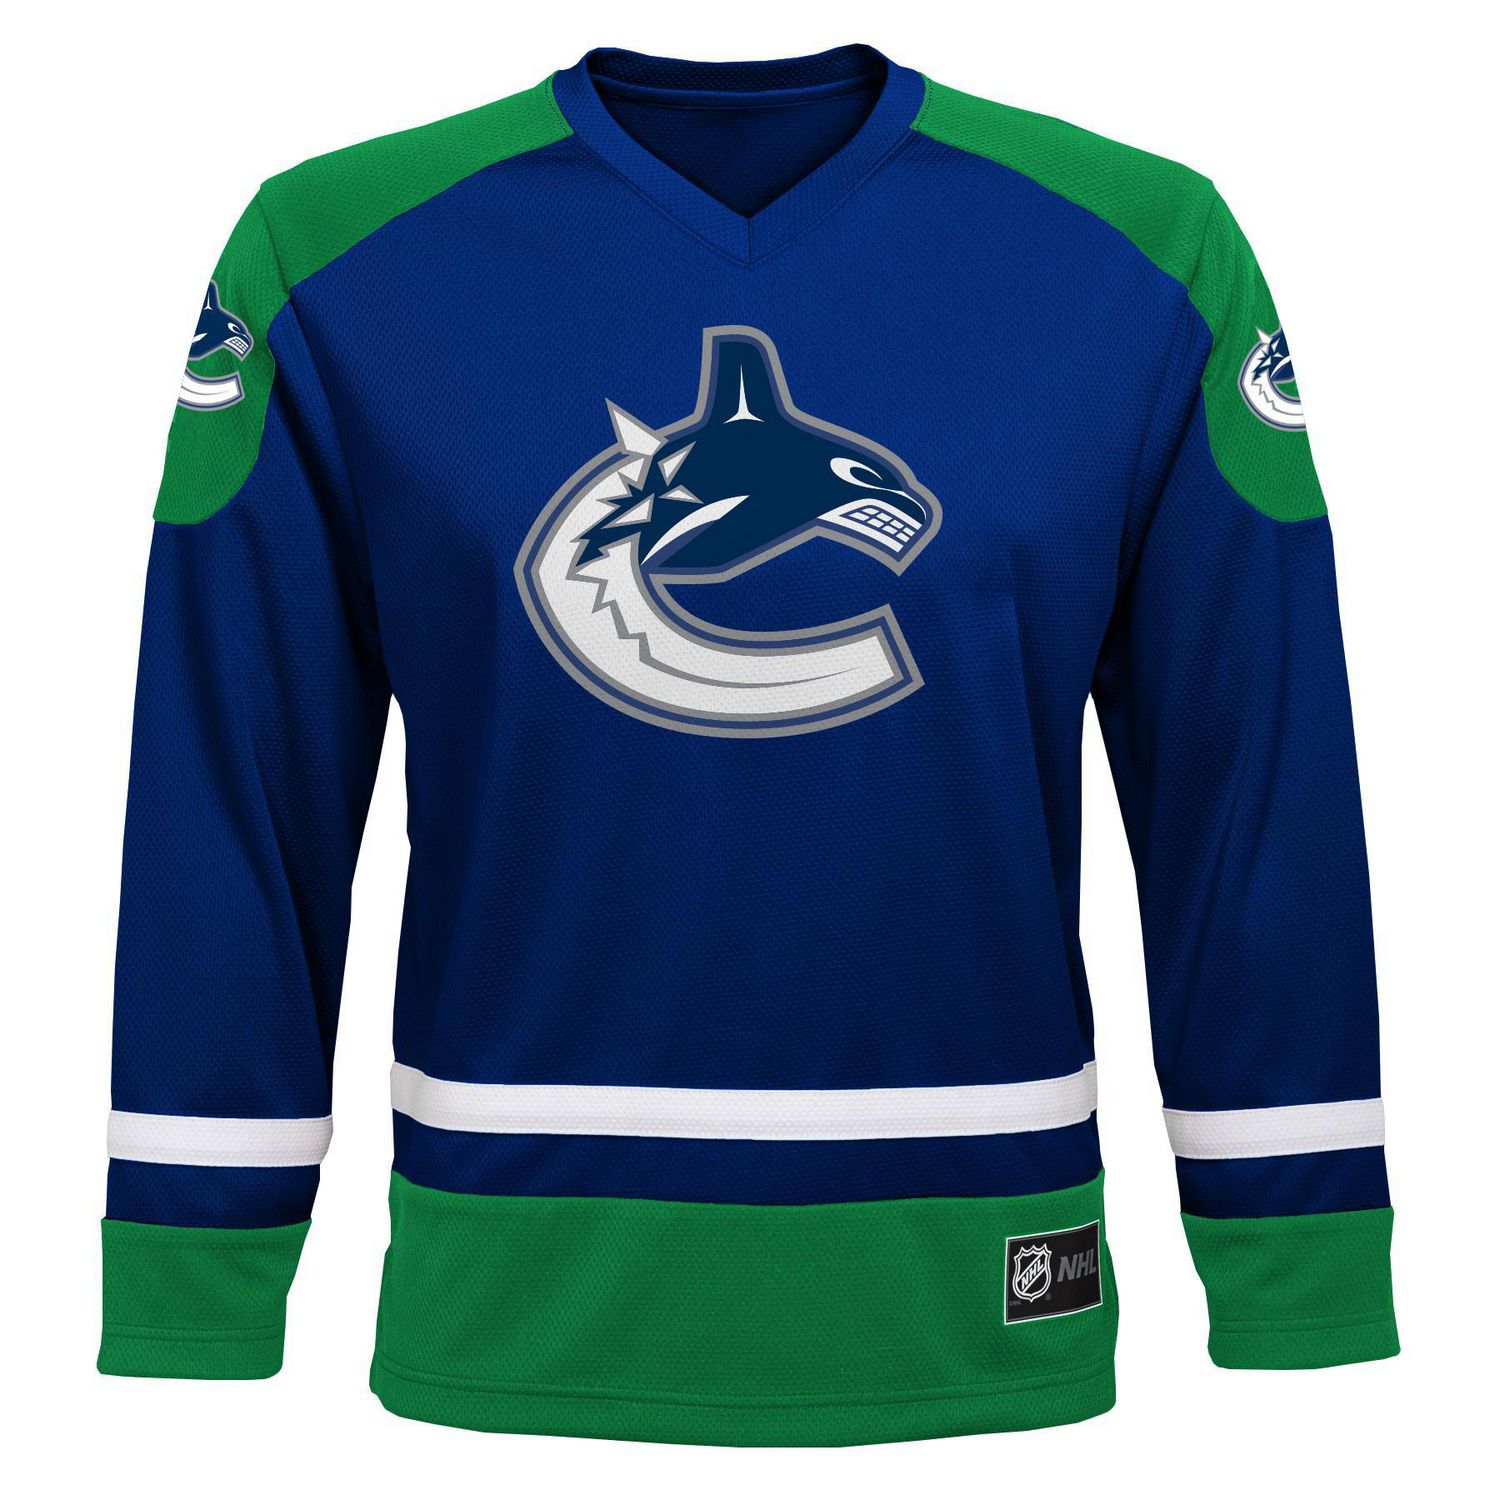 Designer of the Vancouver Canucks' Year of the Rabbit jersey